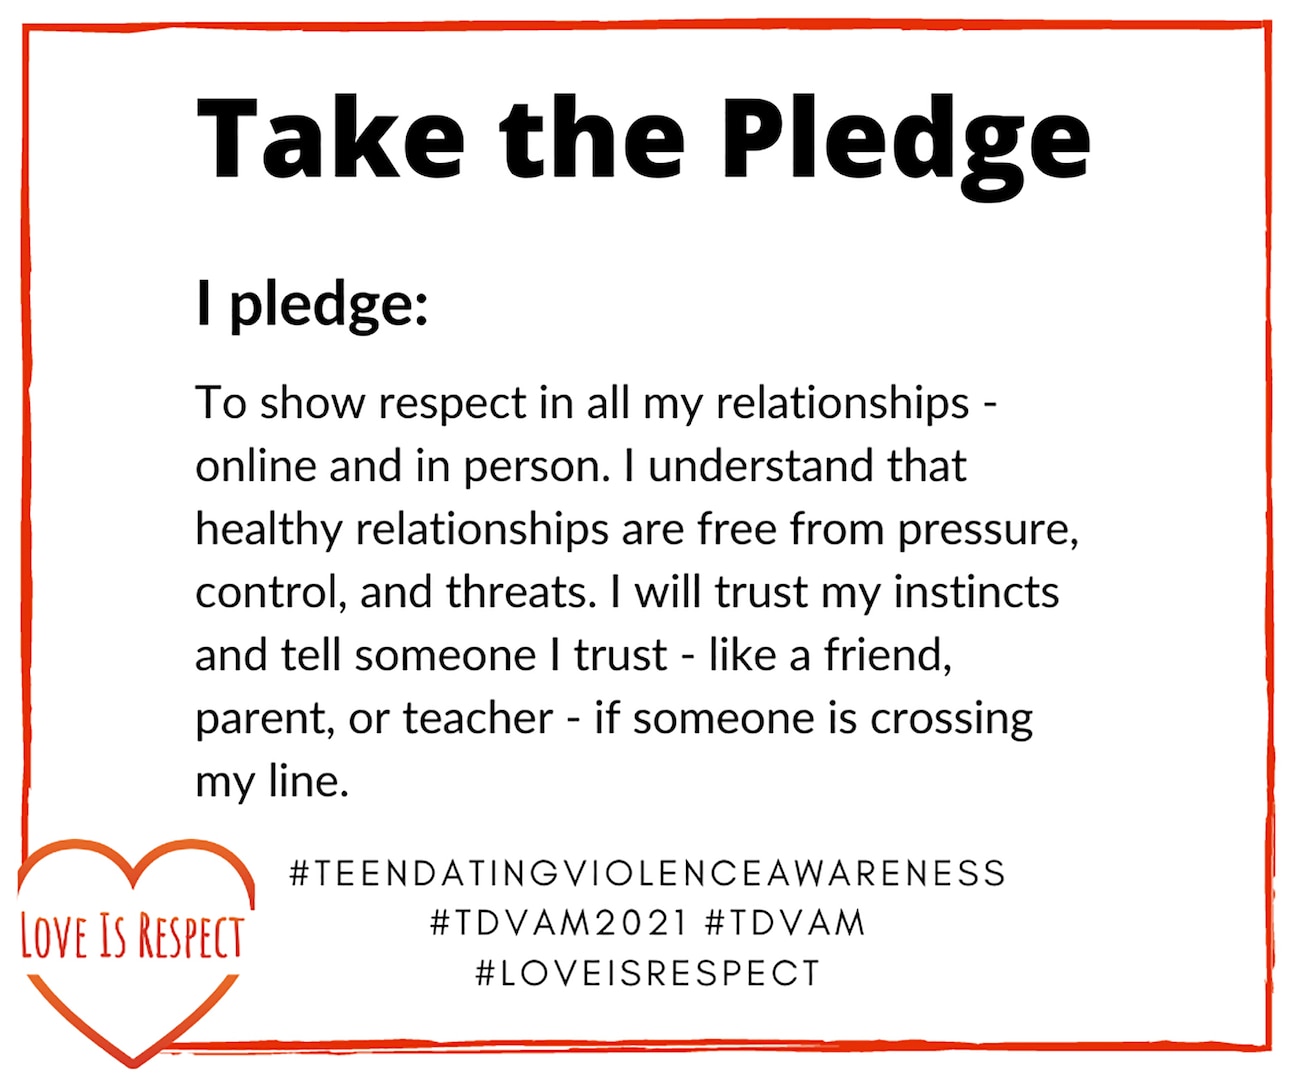 February is Teen Dating Violence Awareness and Prevention Month, or TDVAM.